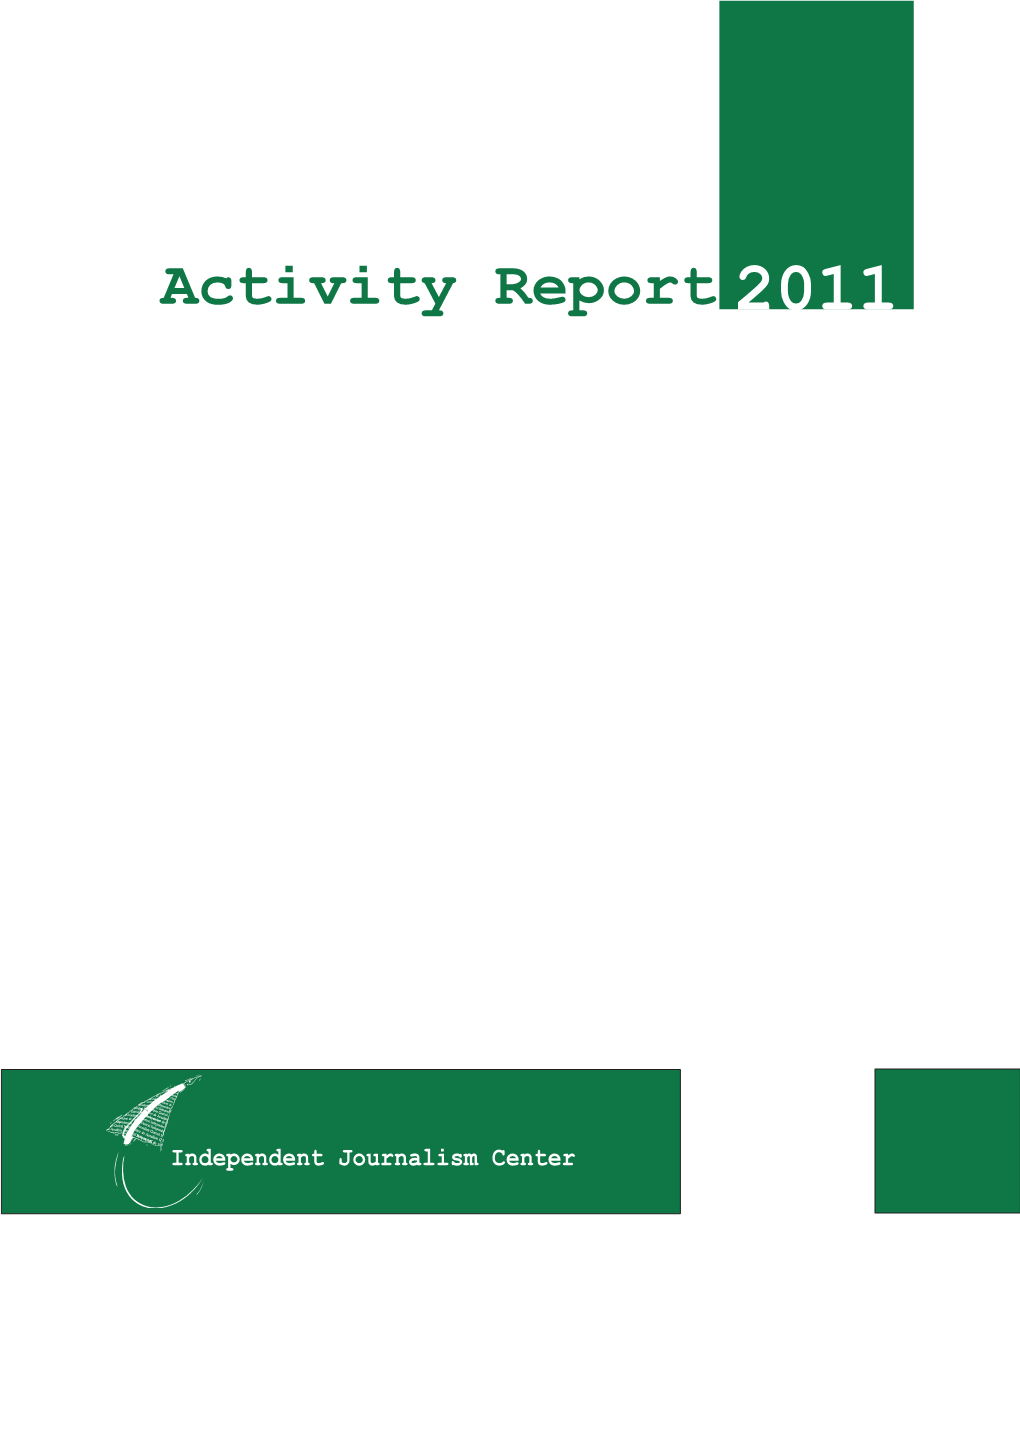 Activity Report 2011 Mission Promote and Support Professional Journalism to Assert Quality, Free and Viable Media CONTENTS